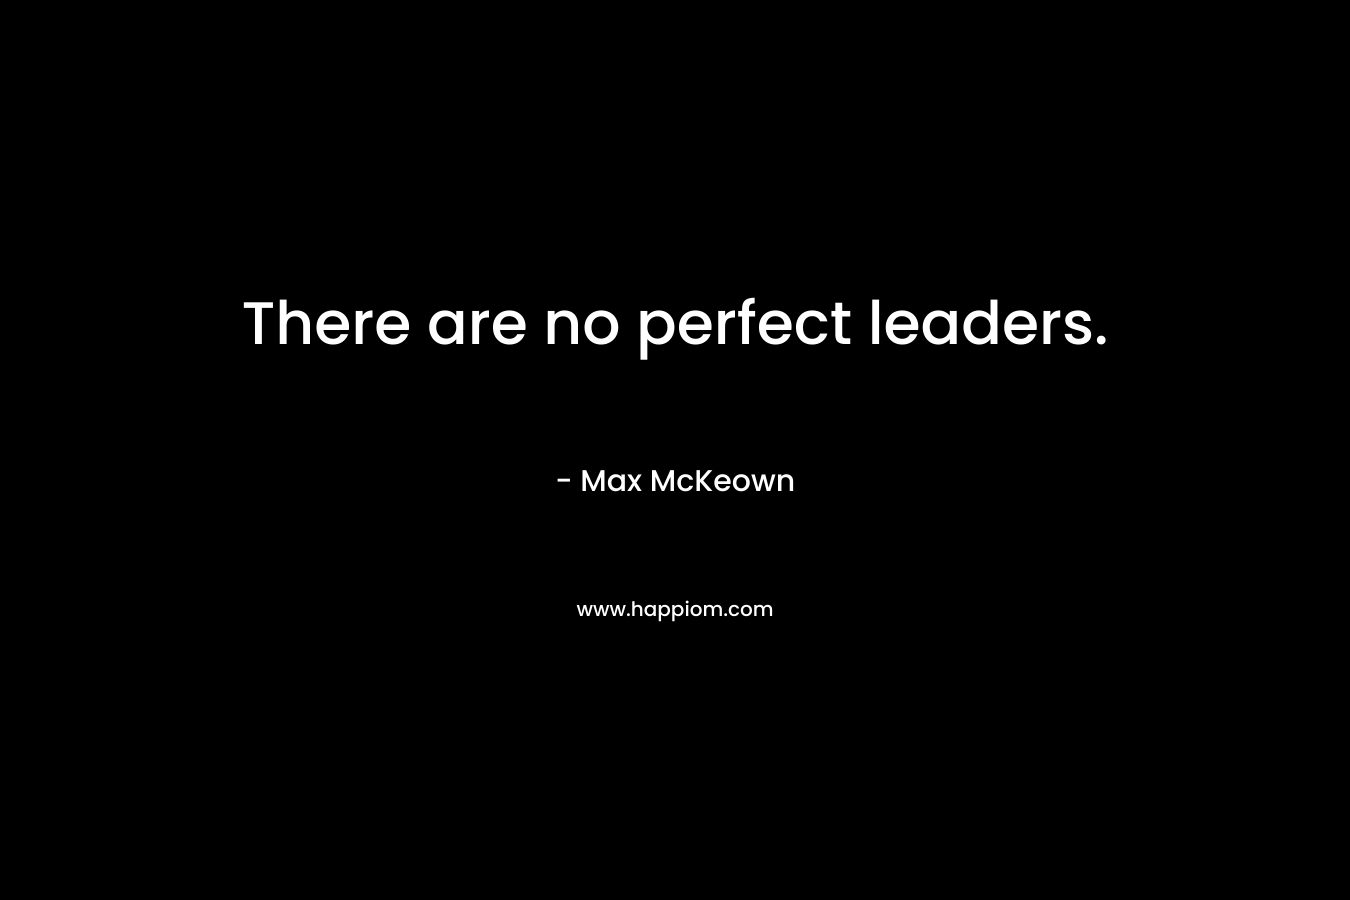 There are no perfect leaders. – Max McKeown